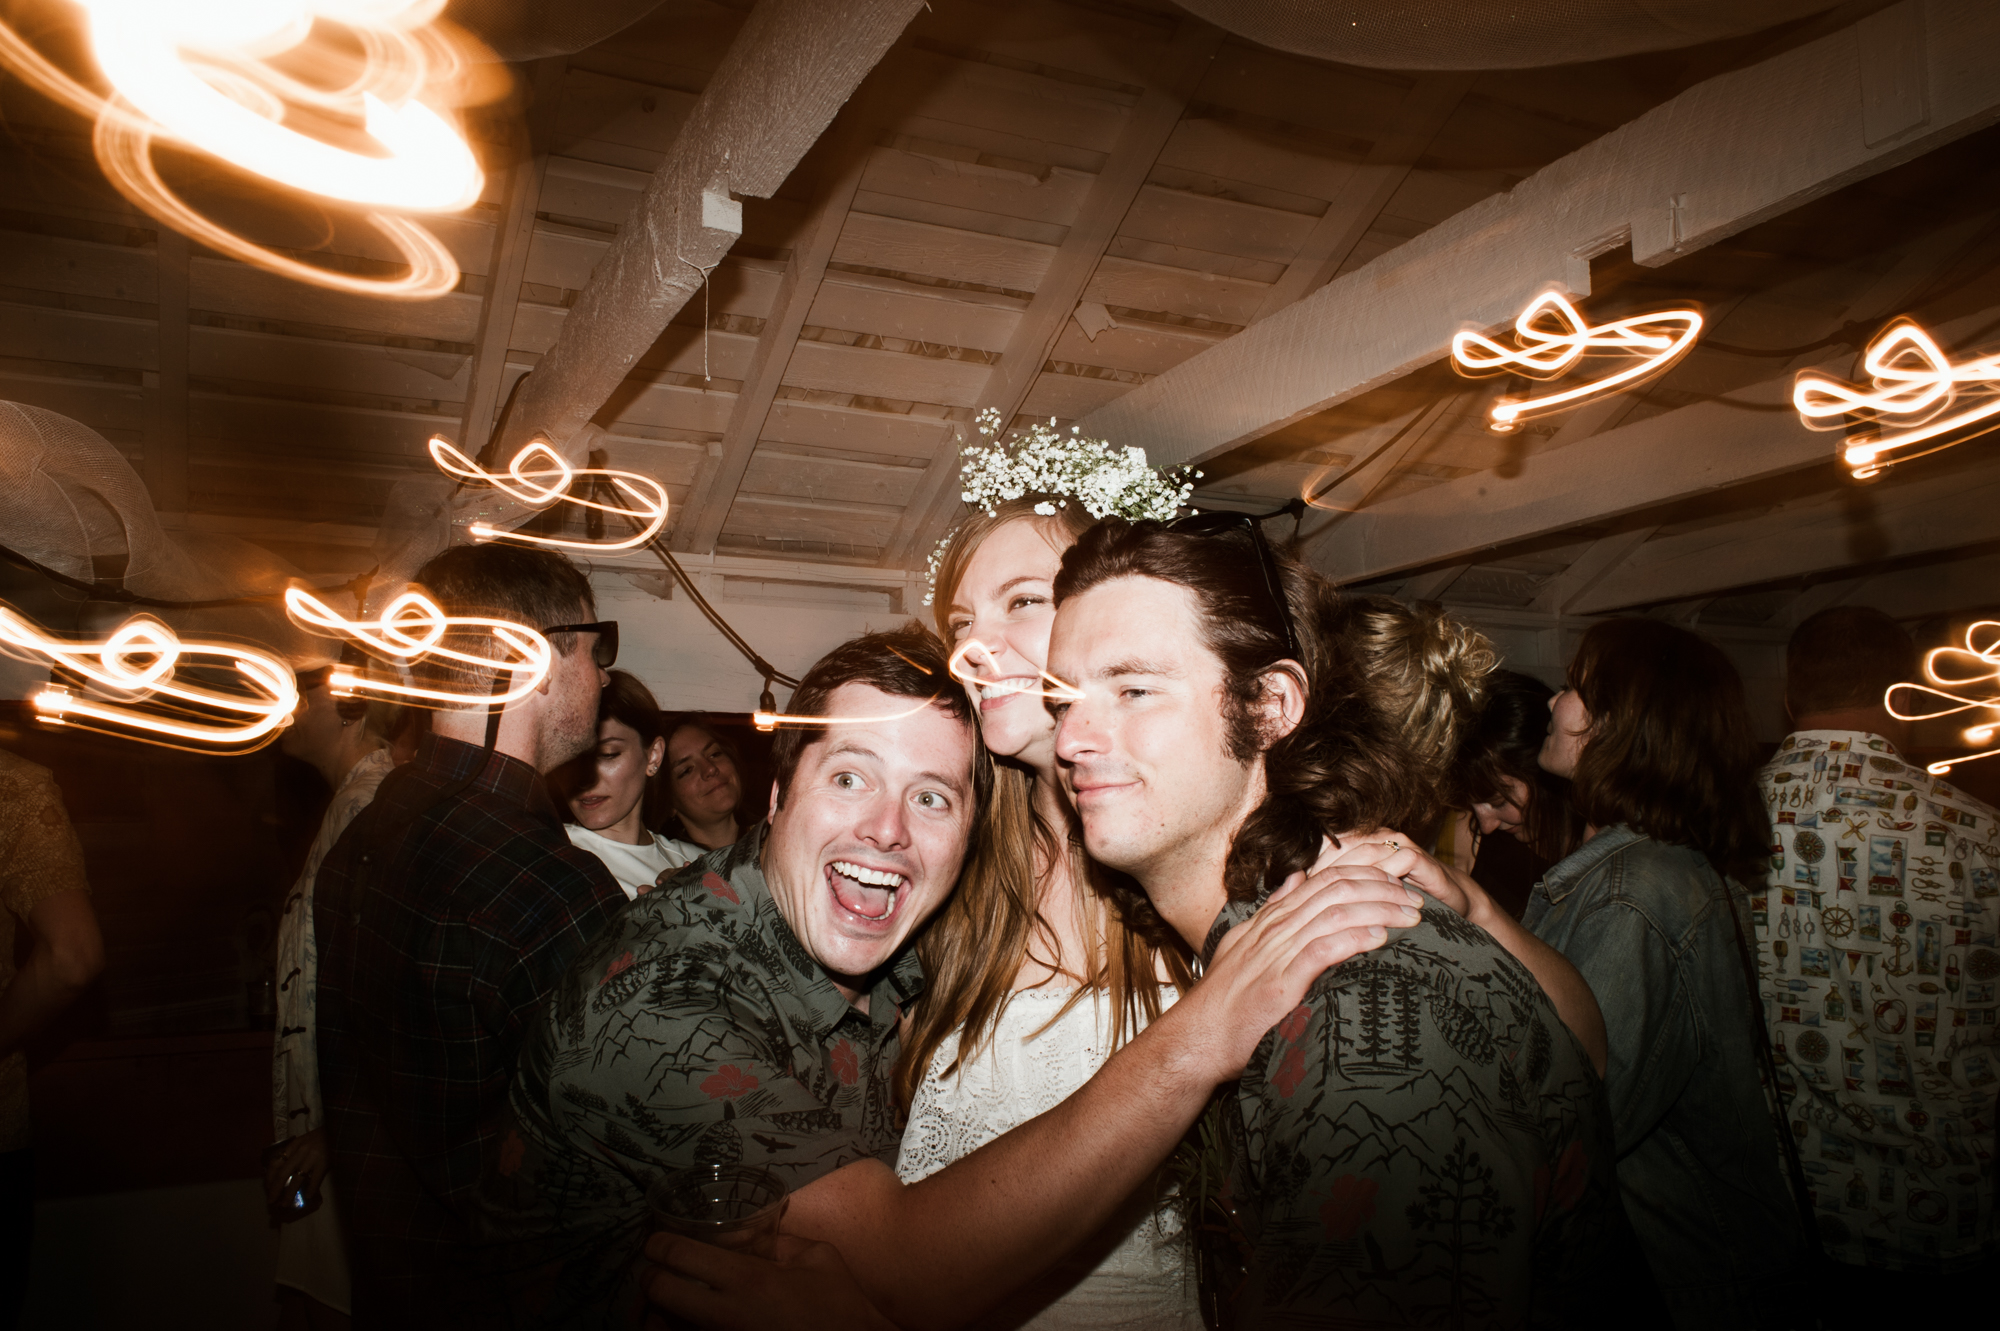 Groomsman photobombs the bride and groom during a dancing portrait. By Sou'Wester wedding photographer Briana Morrison